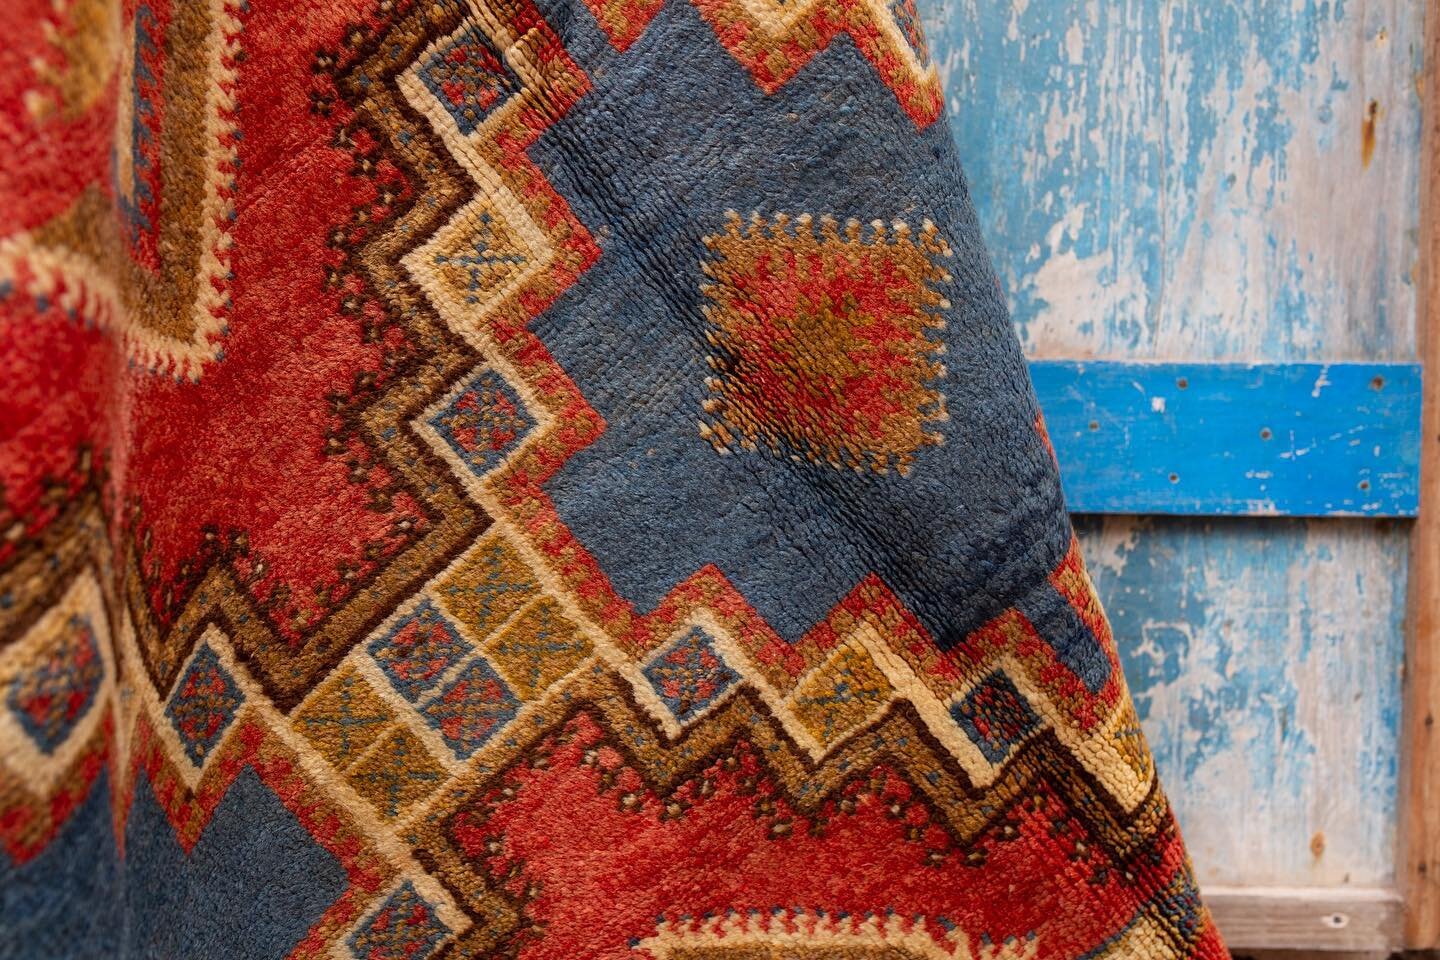 Details on some of the Taznakhts that just hit the website 😍 Use the code RUGLOVE10 for 10% off and there&rsquo;s FREE SHIPPING to the US and EU dima! (always) 🤗 #moroccanrugs #vintagerugs #ruglove #moroccanstyle #moroccandecor #rugs #moroccandesig